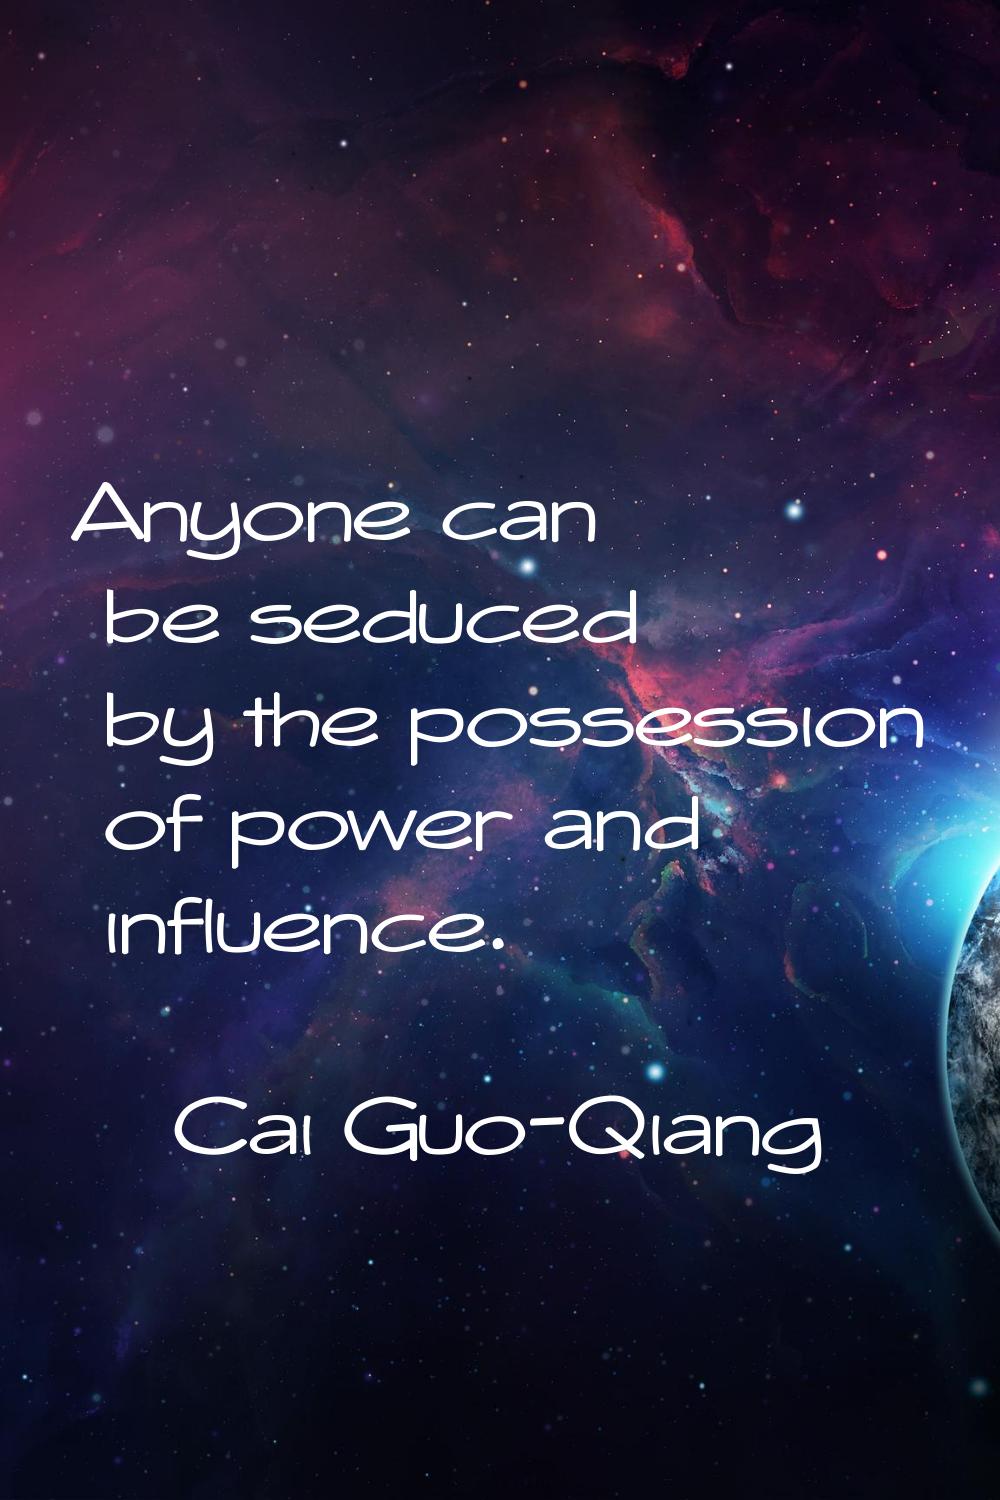 Anyone can be seduced by the possession of power and influence.